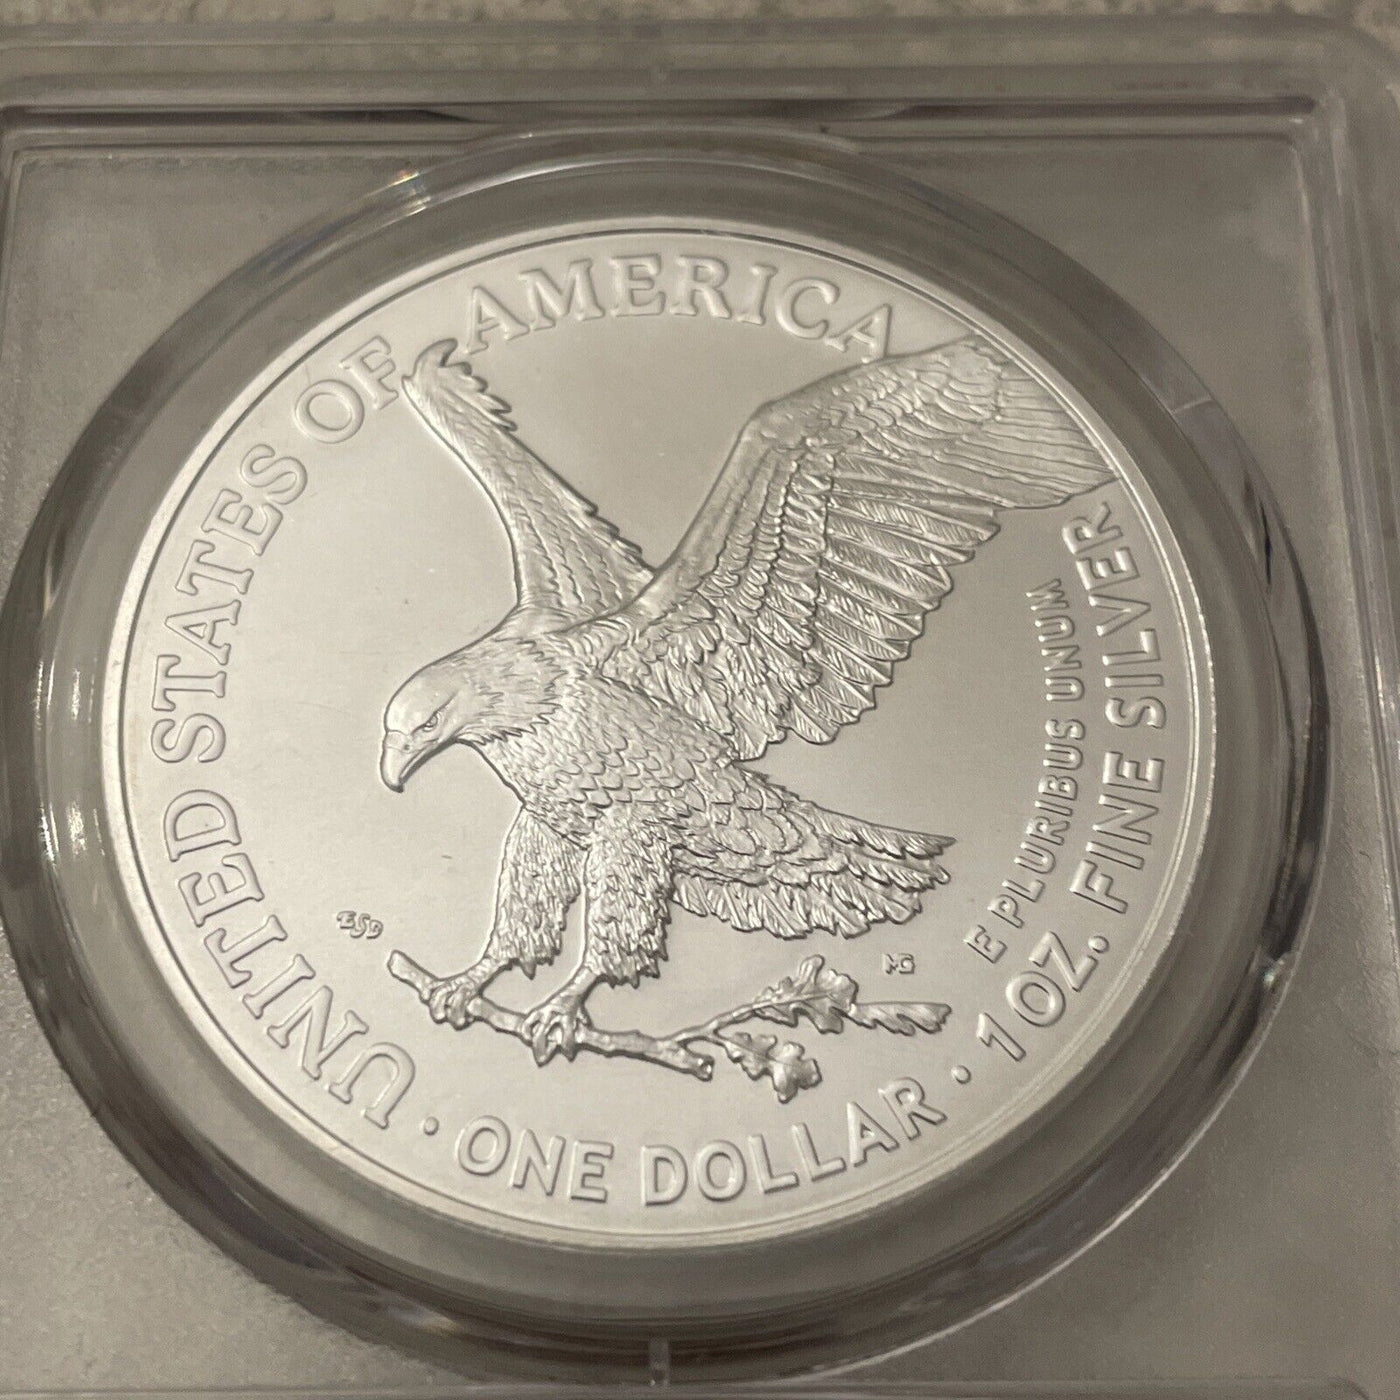 2021 w silver Eagle ty2 R Brazile First Production PCGS MS70 free S&H   Fly Flt